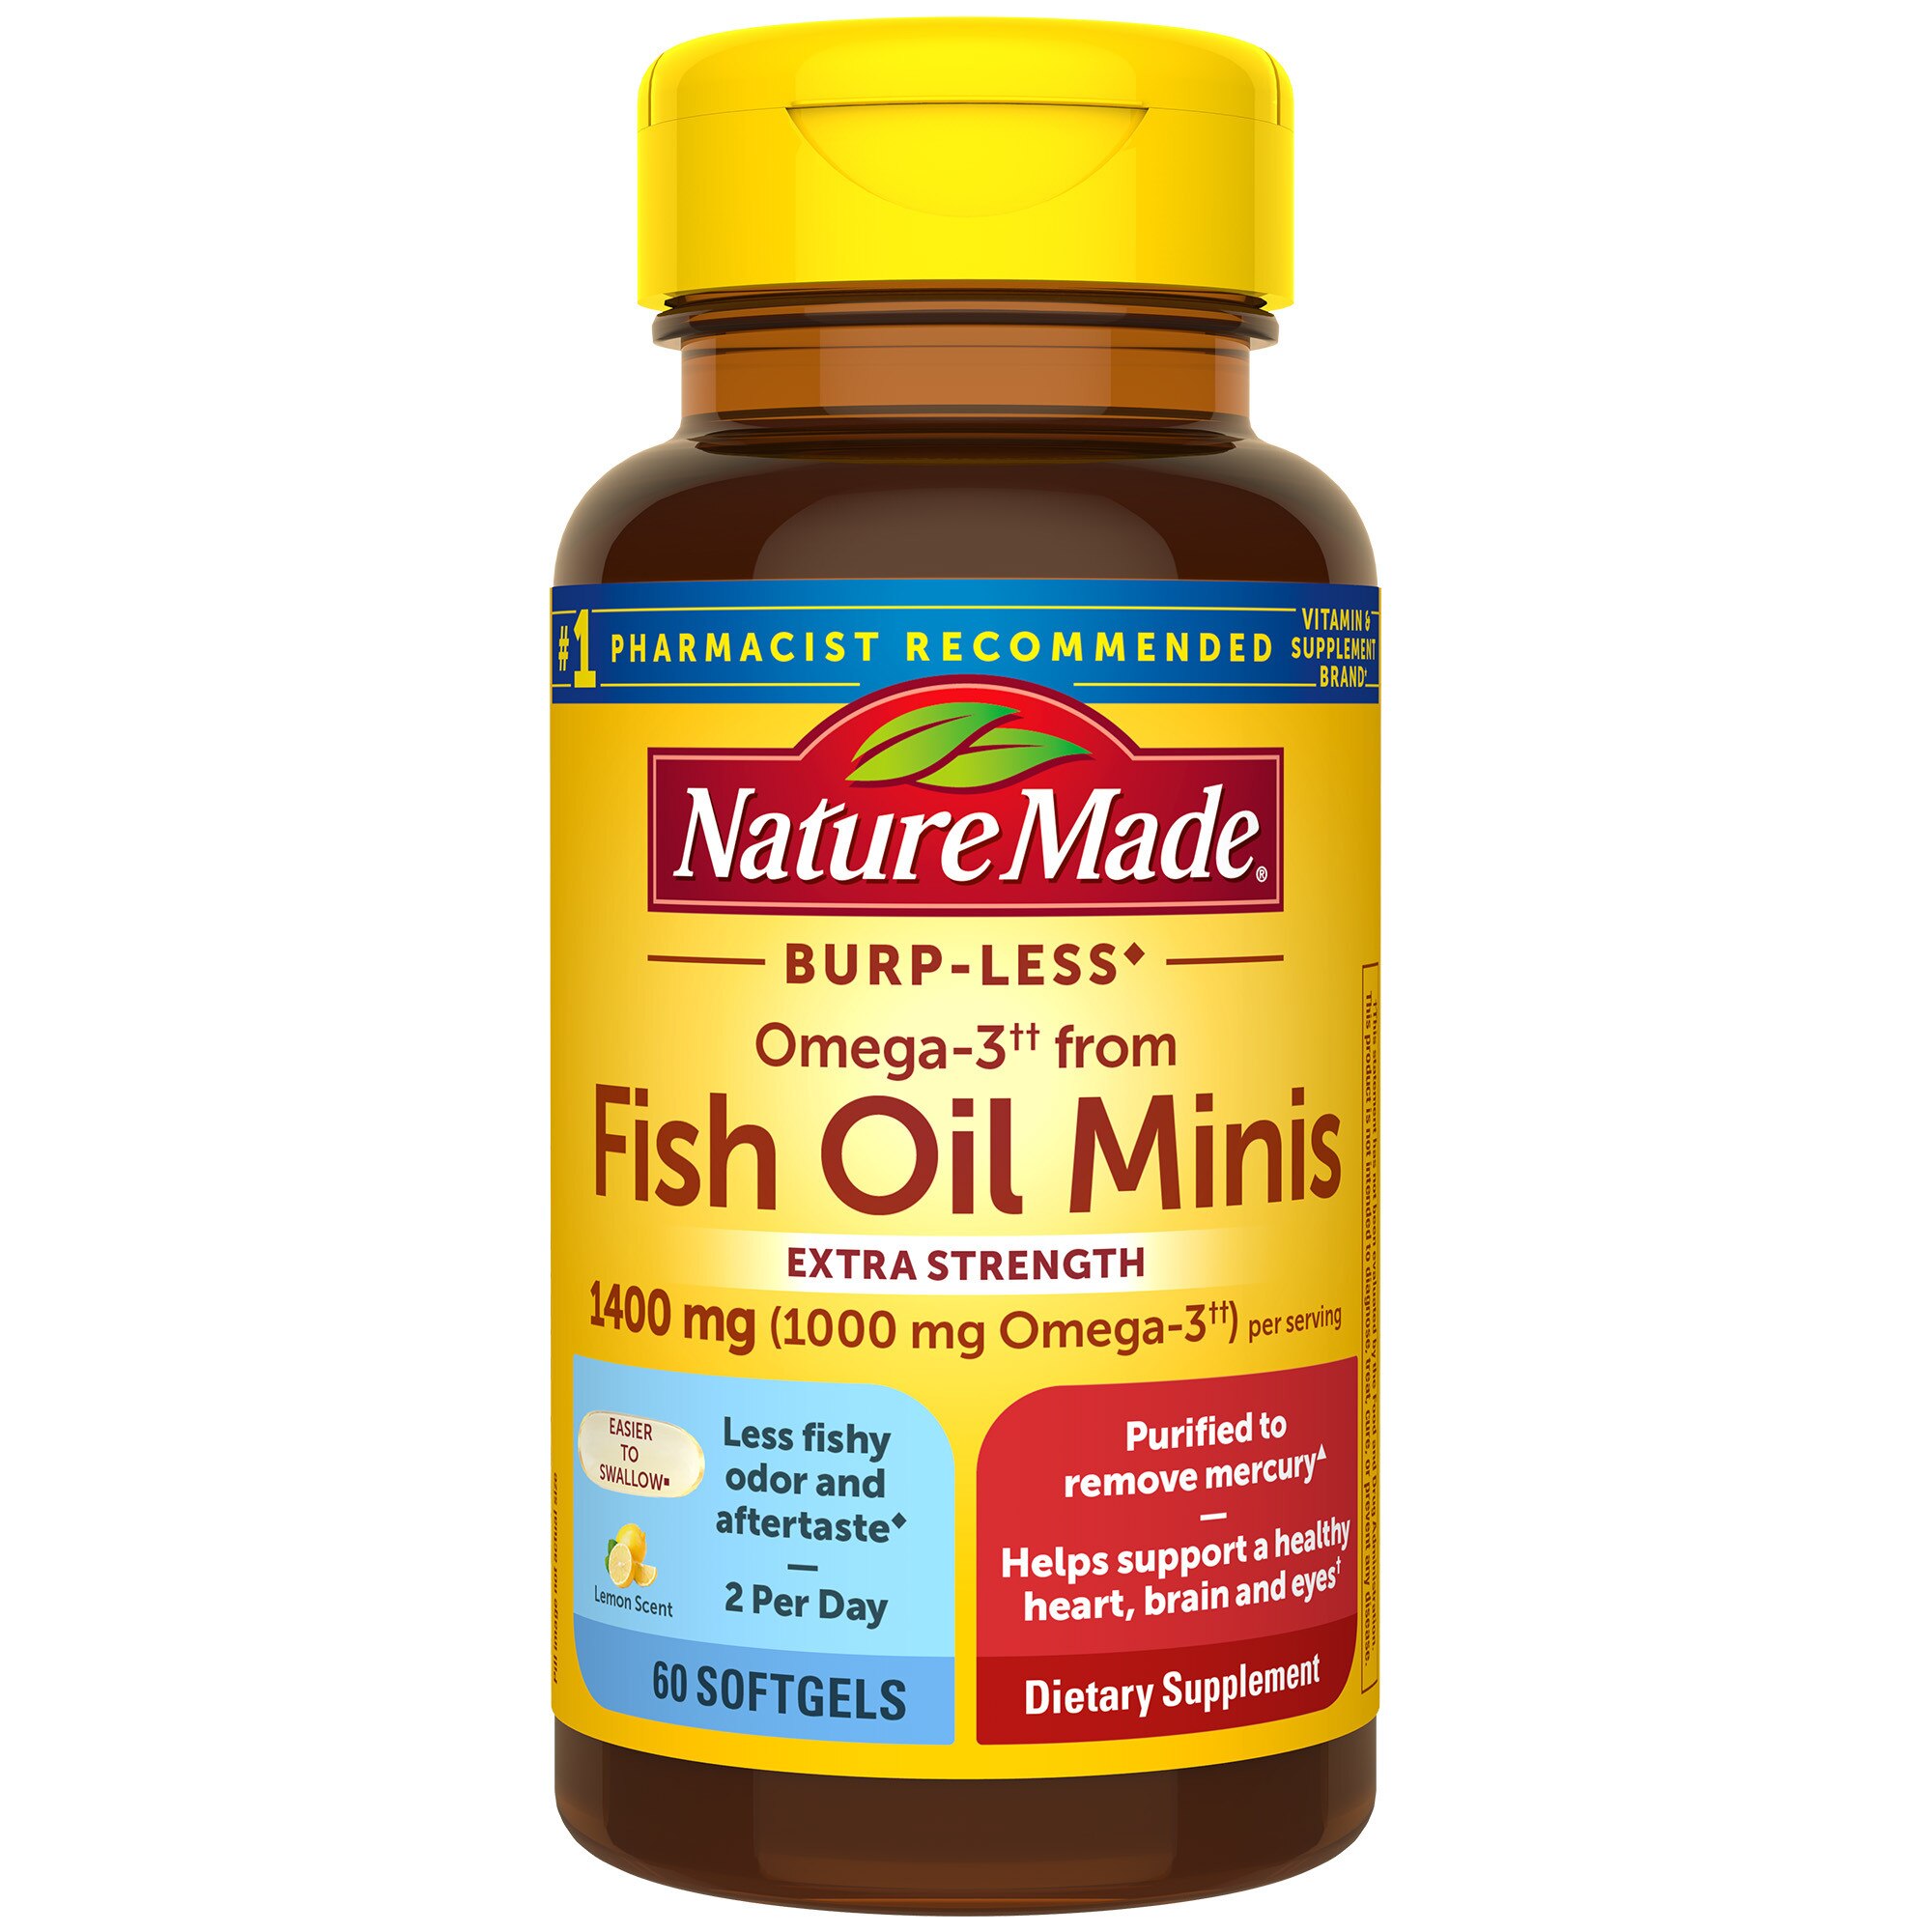 Nature Made Burp-Less Omega-3 from Fish Oil Minis 1400 mg Softgels, 60 CT